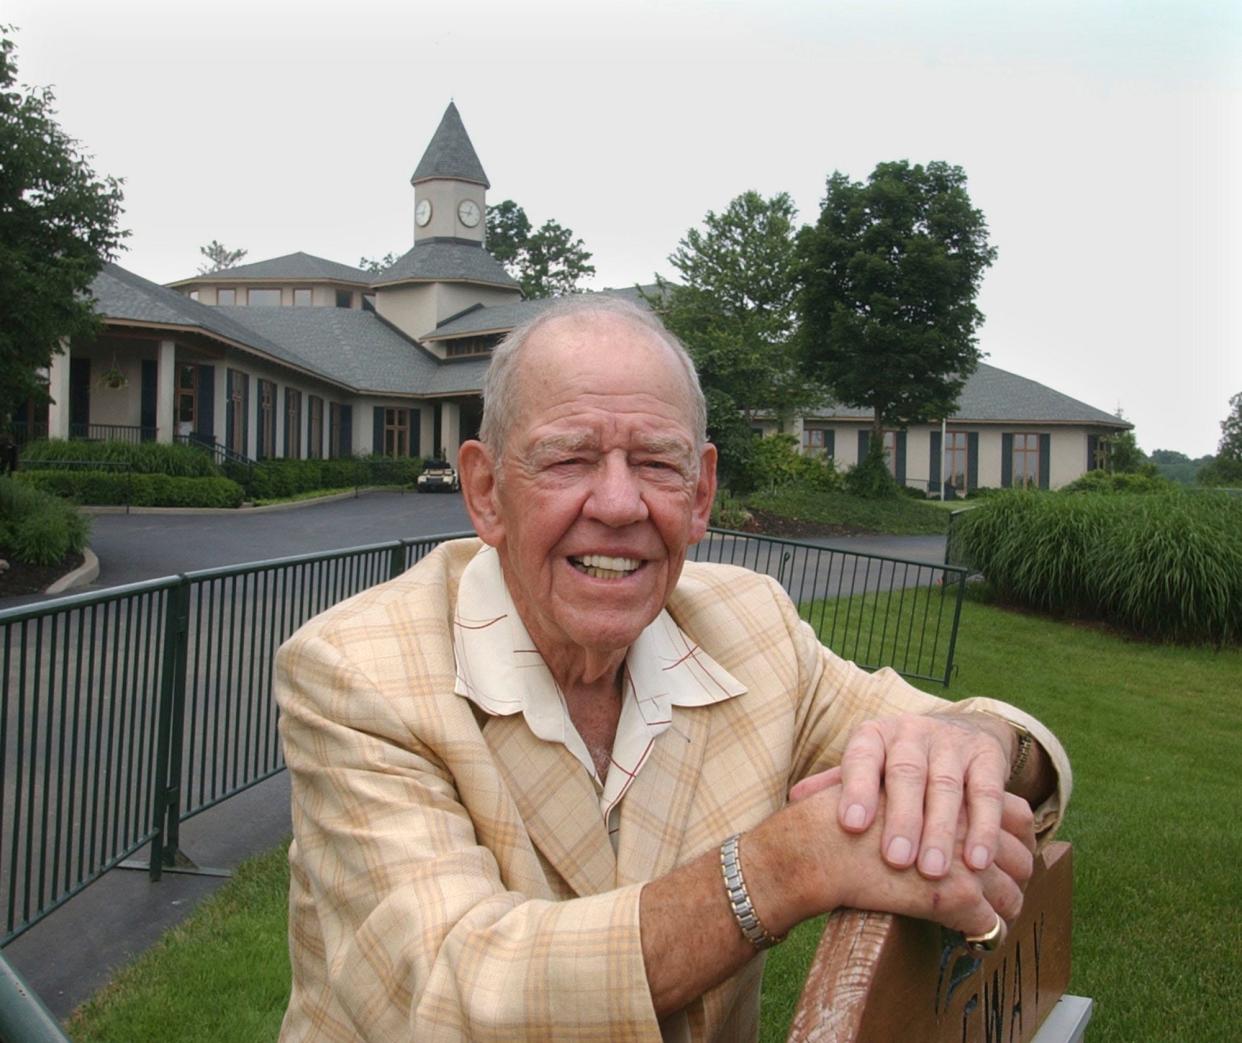 Pictured in 2004, Dwight Gahm, founder of Valhalla Golf, with the Valhalla clubhouse behind him. Gahm, then 85, sold Valhalla Golf Club in 1996 but still played the course four times a week. "Every year, I appreciate it a little more," he said.